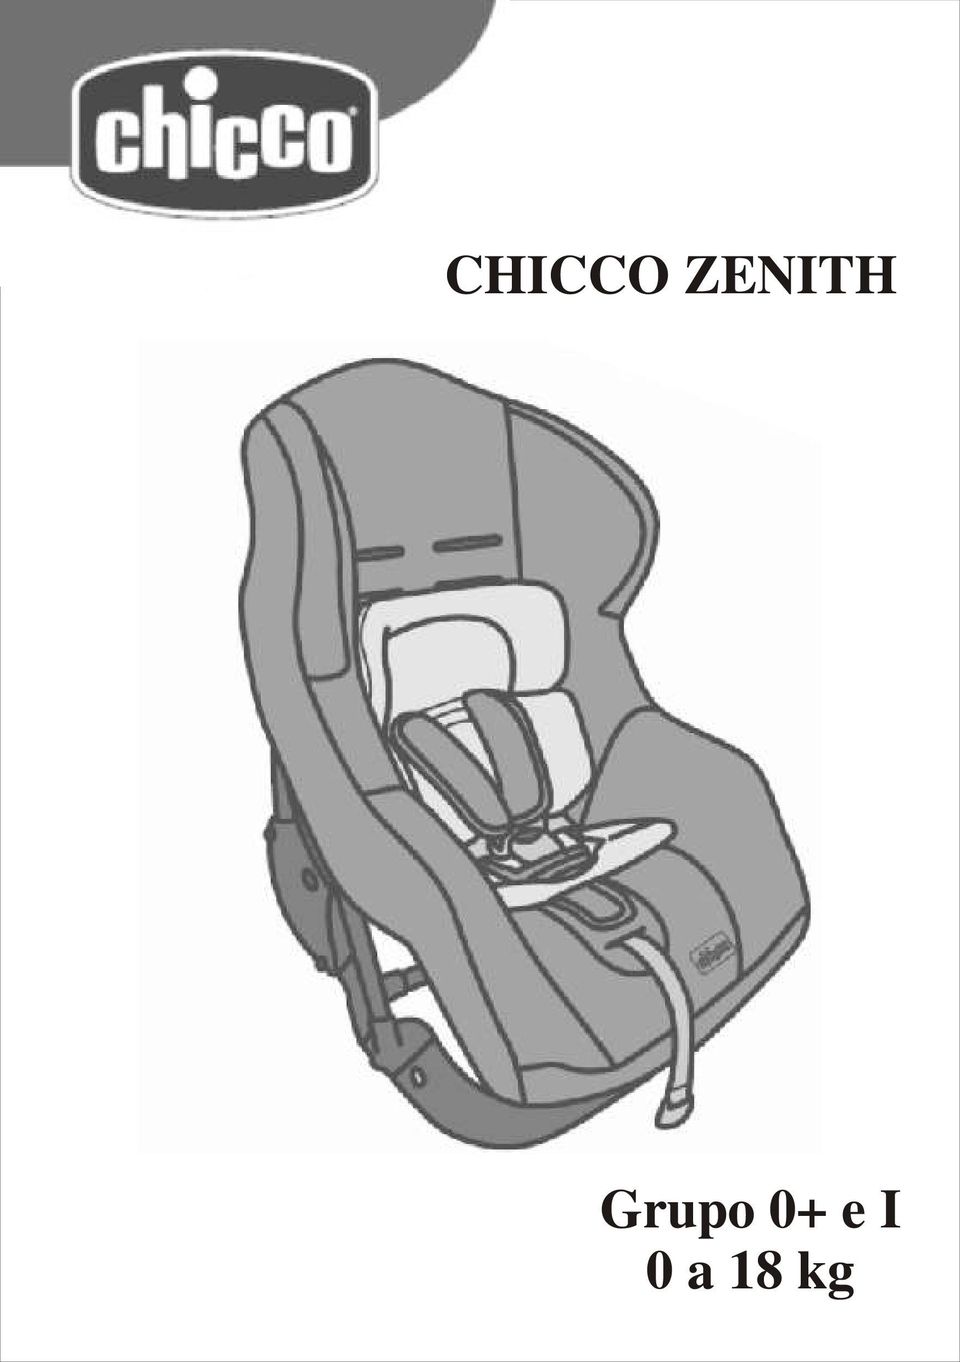 Playground equipment Satisfy lottery CHICCO ZENITH. Grupo 0+ e I 0 a 18 kg - PDF Free Download